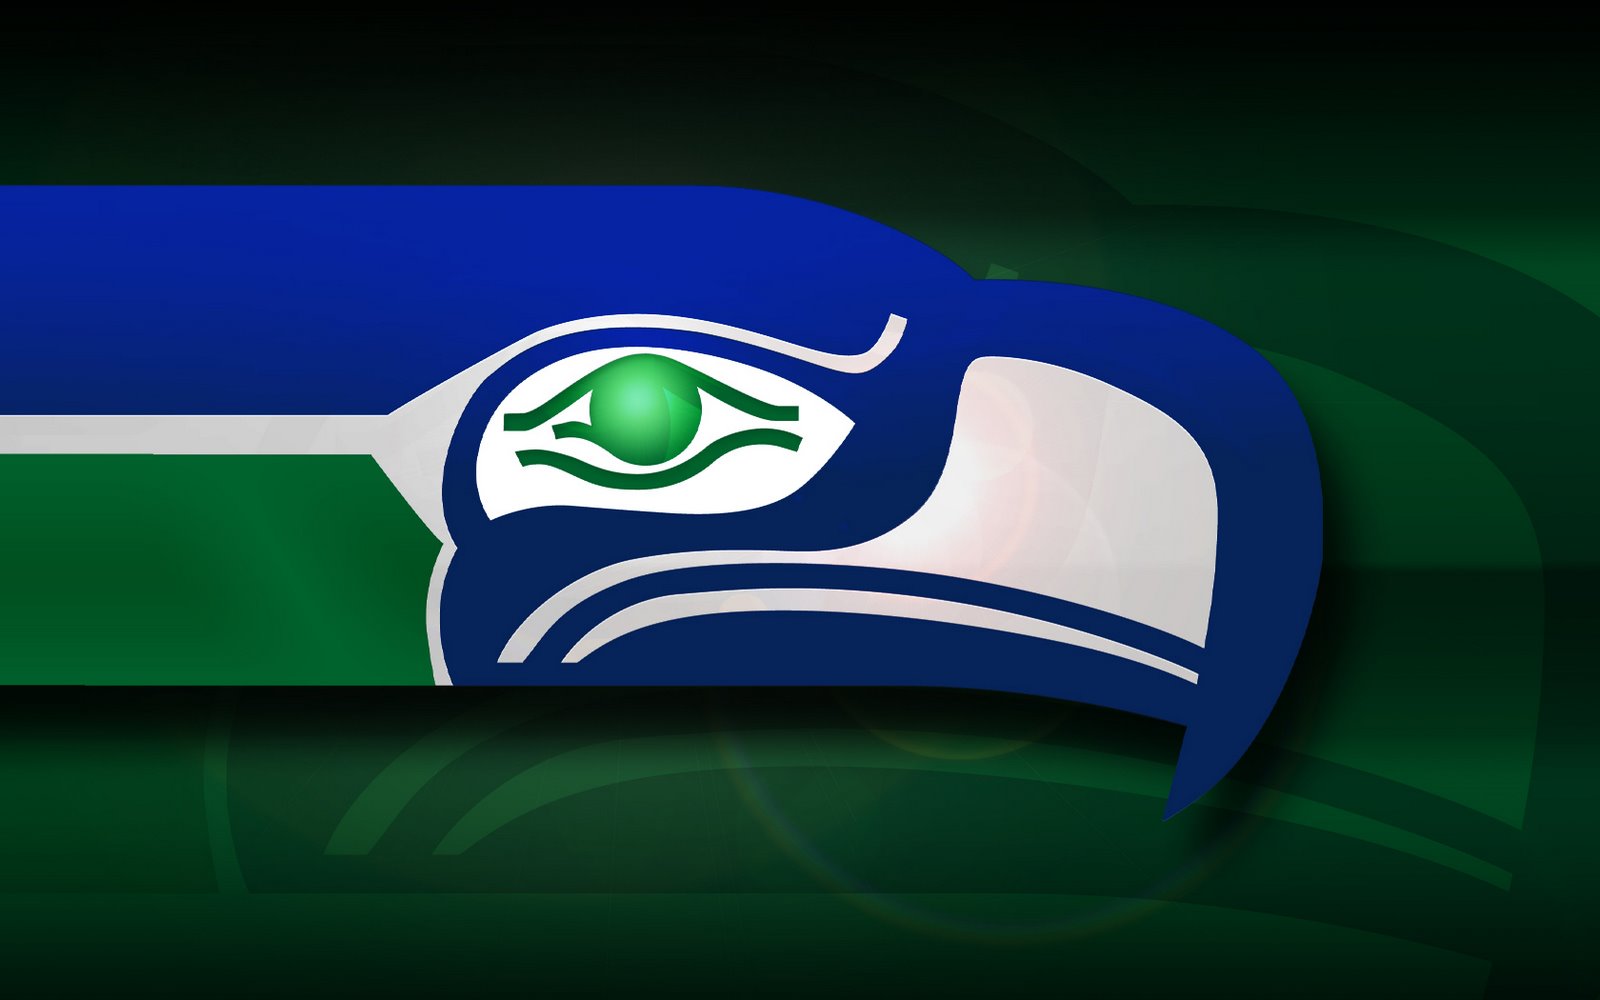 History Of All Logos All Seattle Seahawks Logos